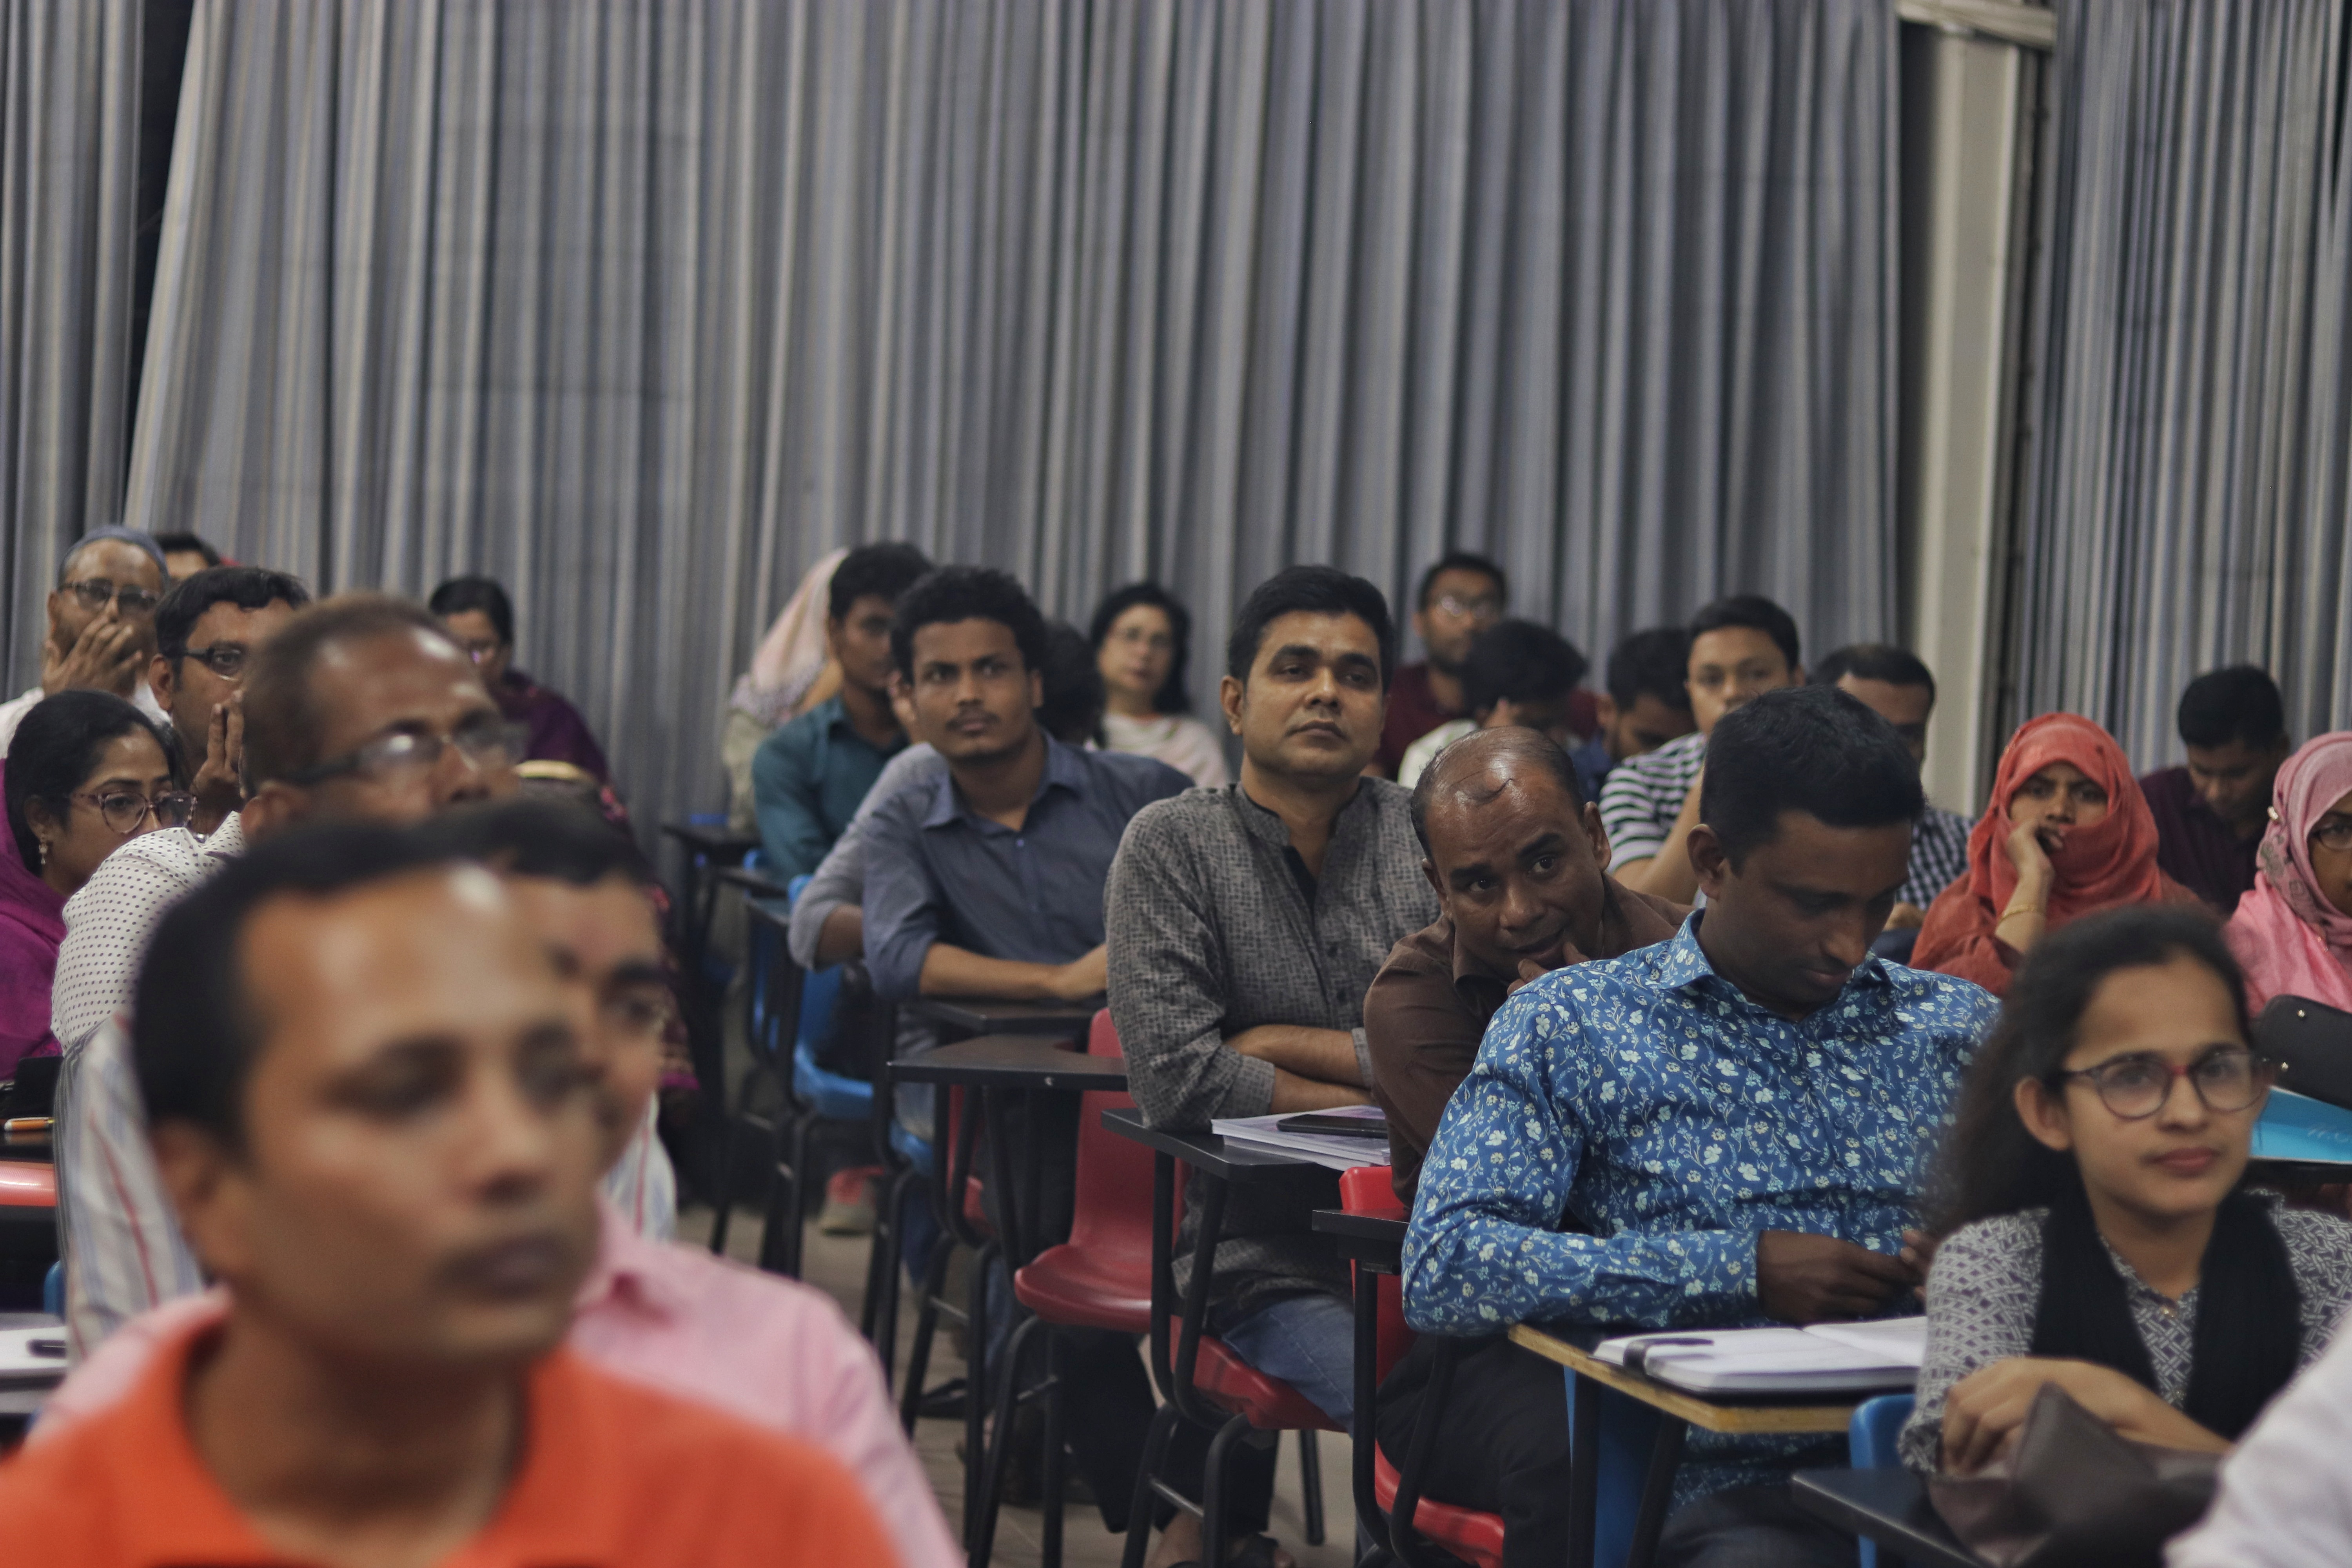 Open Data Day participants at the Bangladesh Open University